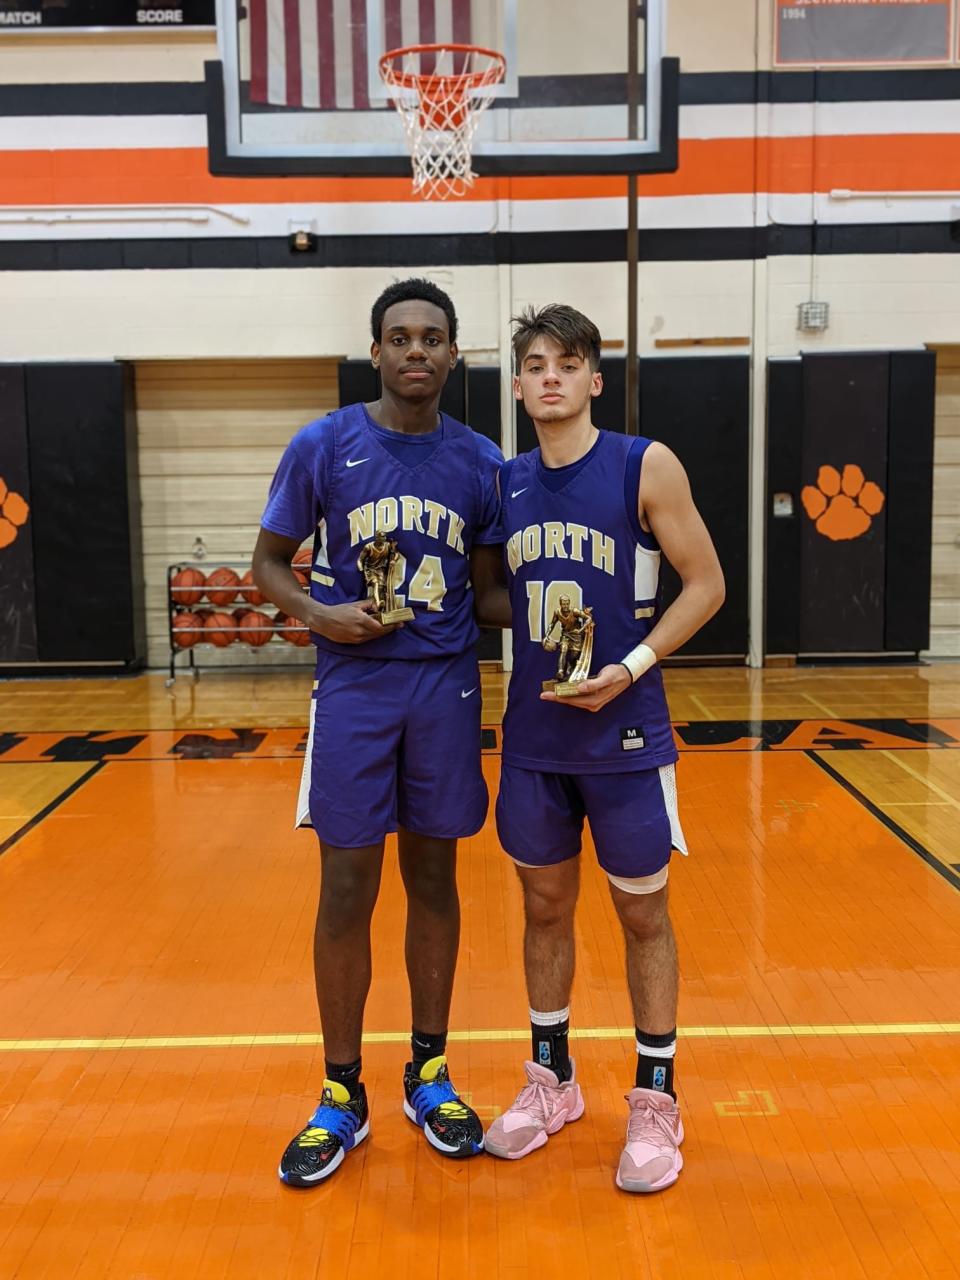 Frank Bruno (left) and Chris Merlius are pictured after leading Clarkstown North to a 58-38 win over White Plains at the Harry Jefferson Showcase on Dec. 3, 2021.